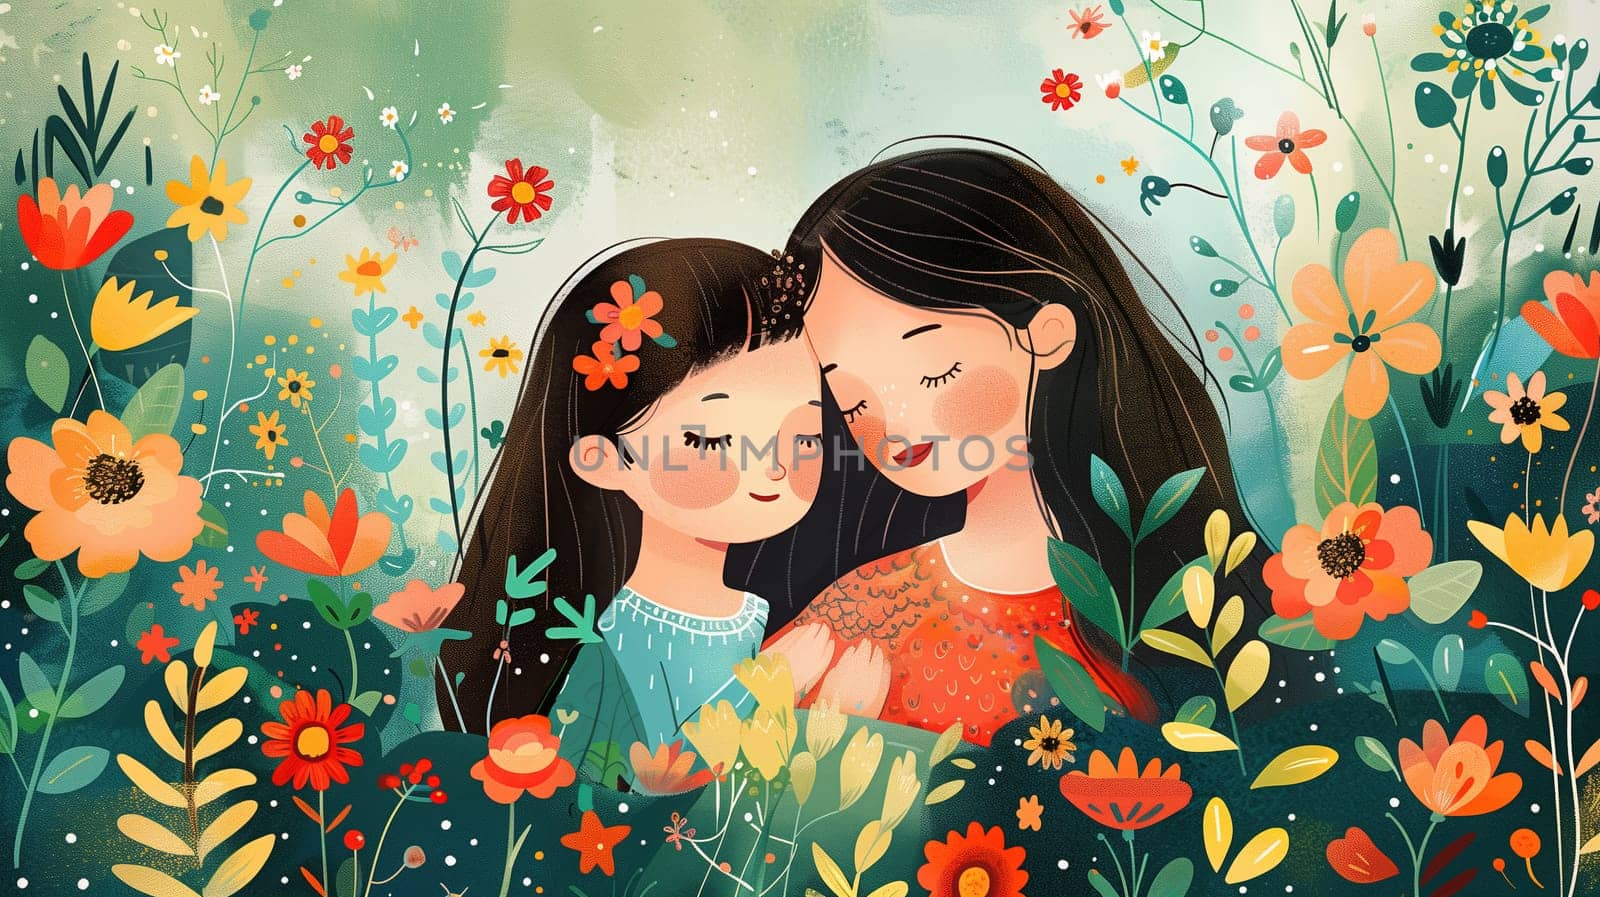 Two young girls are standing in a vibrant field of colorful flowers, enjoying the beauty of nature surrounding them.